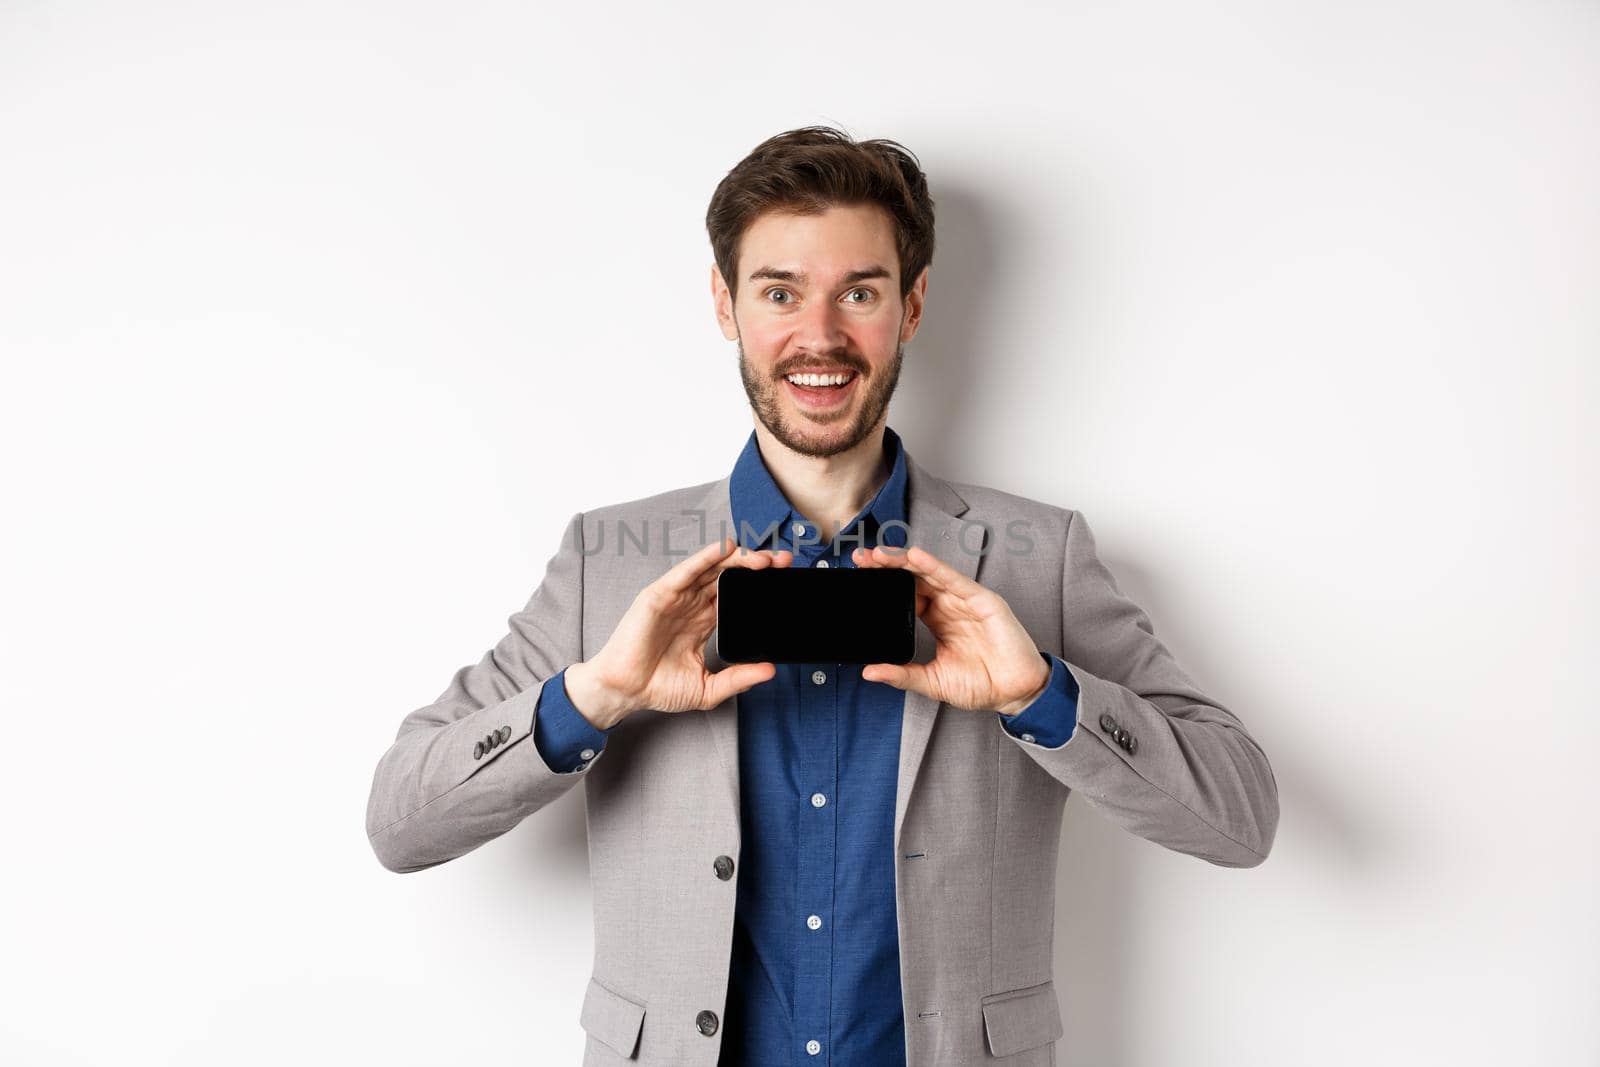 E-commerce and online shopping concept. Excited young businessman in suit showing empty smartphone, screen demonstrate app achievement, white background.